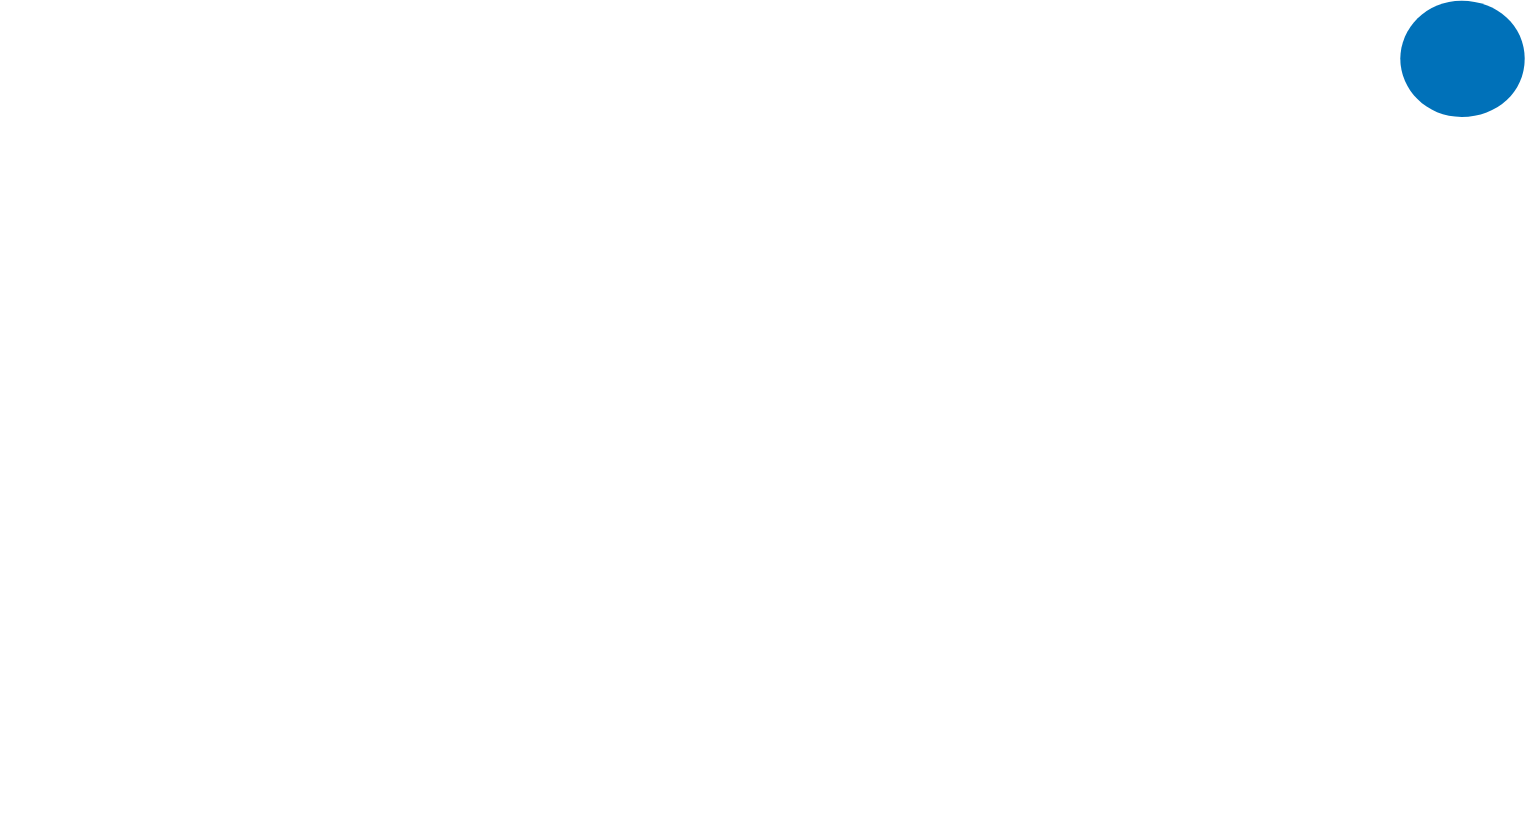 Computer Programs and Systems logo for dark backgrounds (transparent PNG)